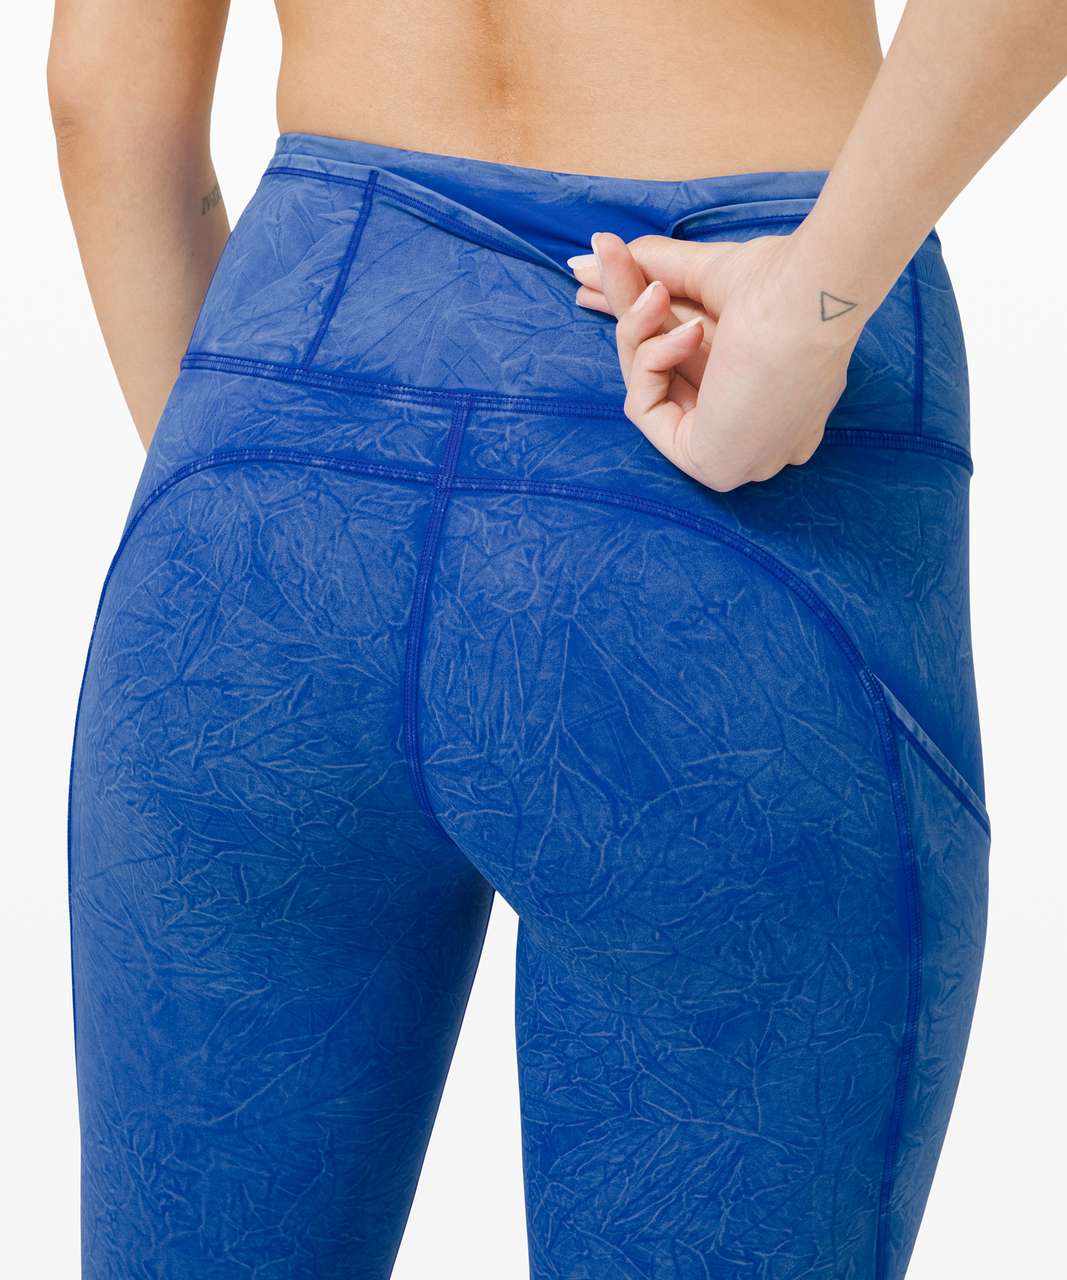 Lululemon Fast and Free High Rise Tight 25 *Ice Dye - Ice Wash